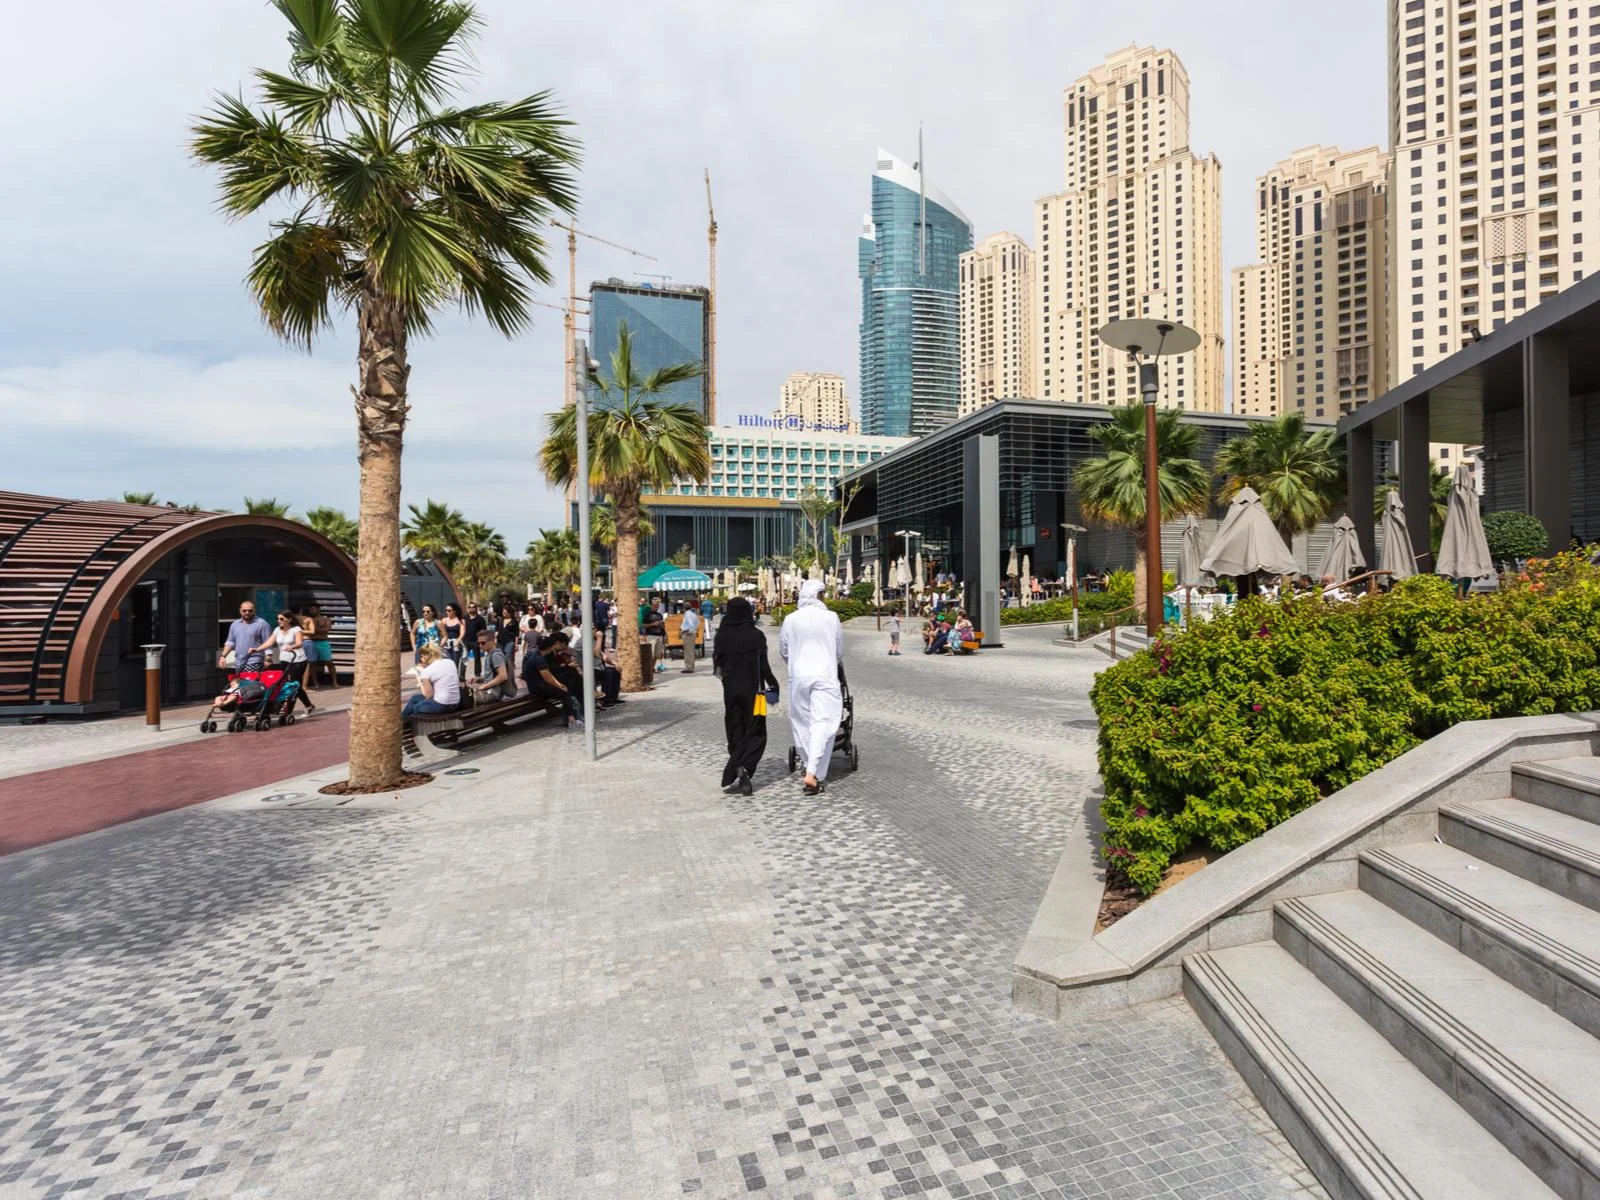 View of Jumeirah Beach Residence and people walking on the sidewalk for a piece titled Is Dubai Safe